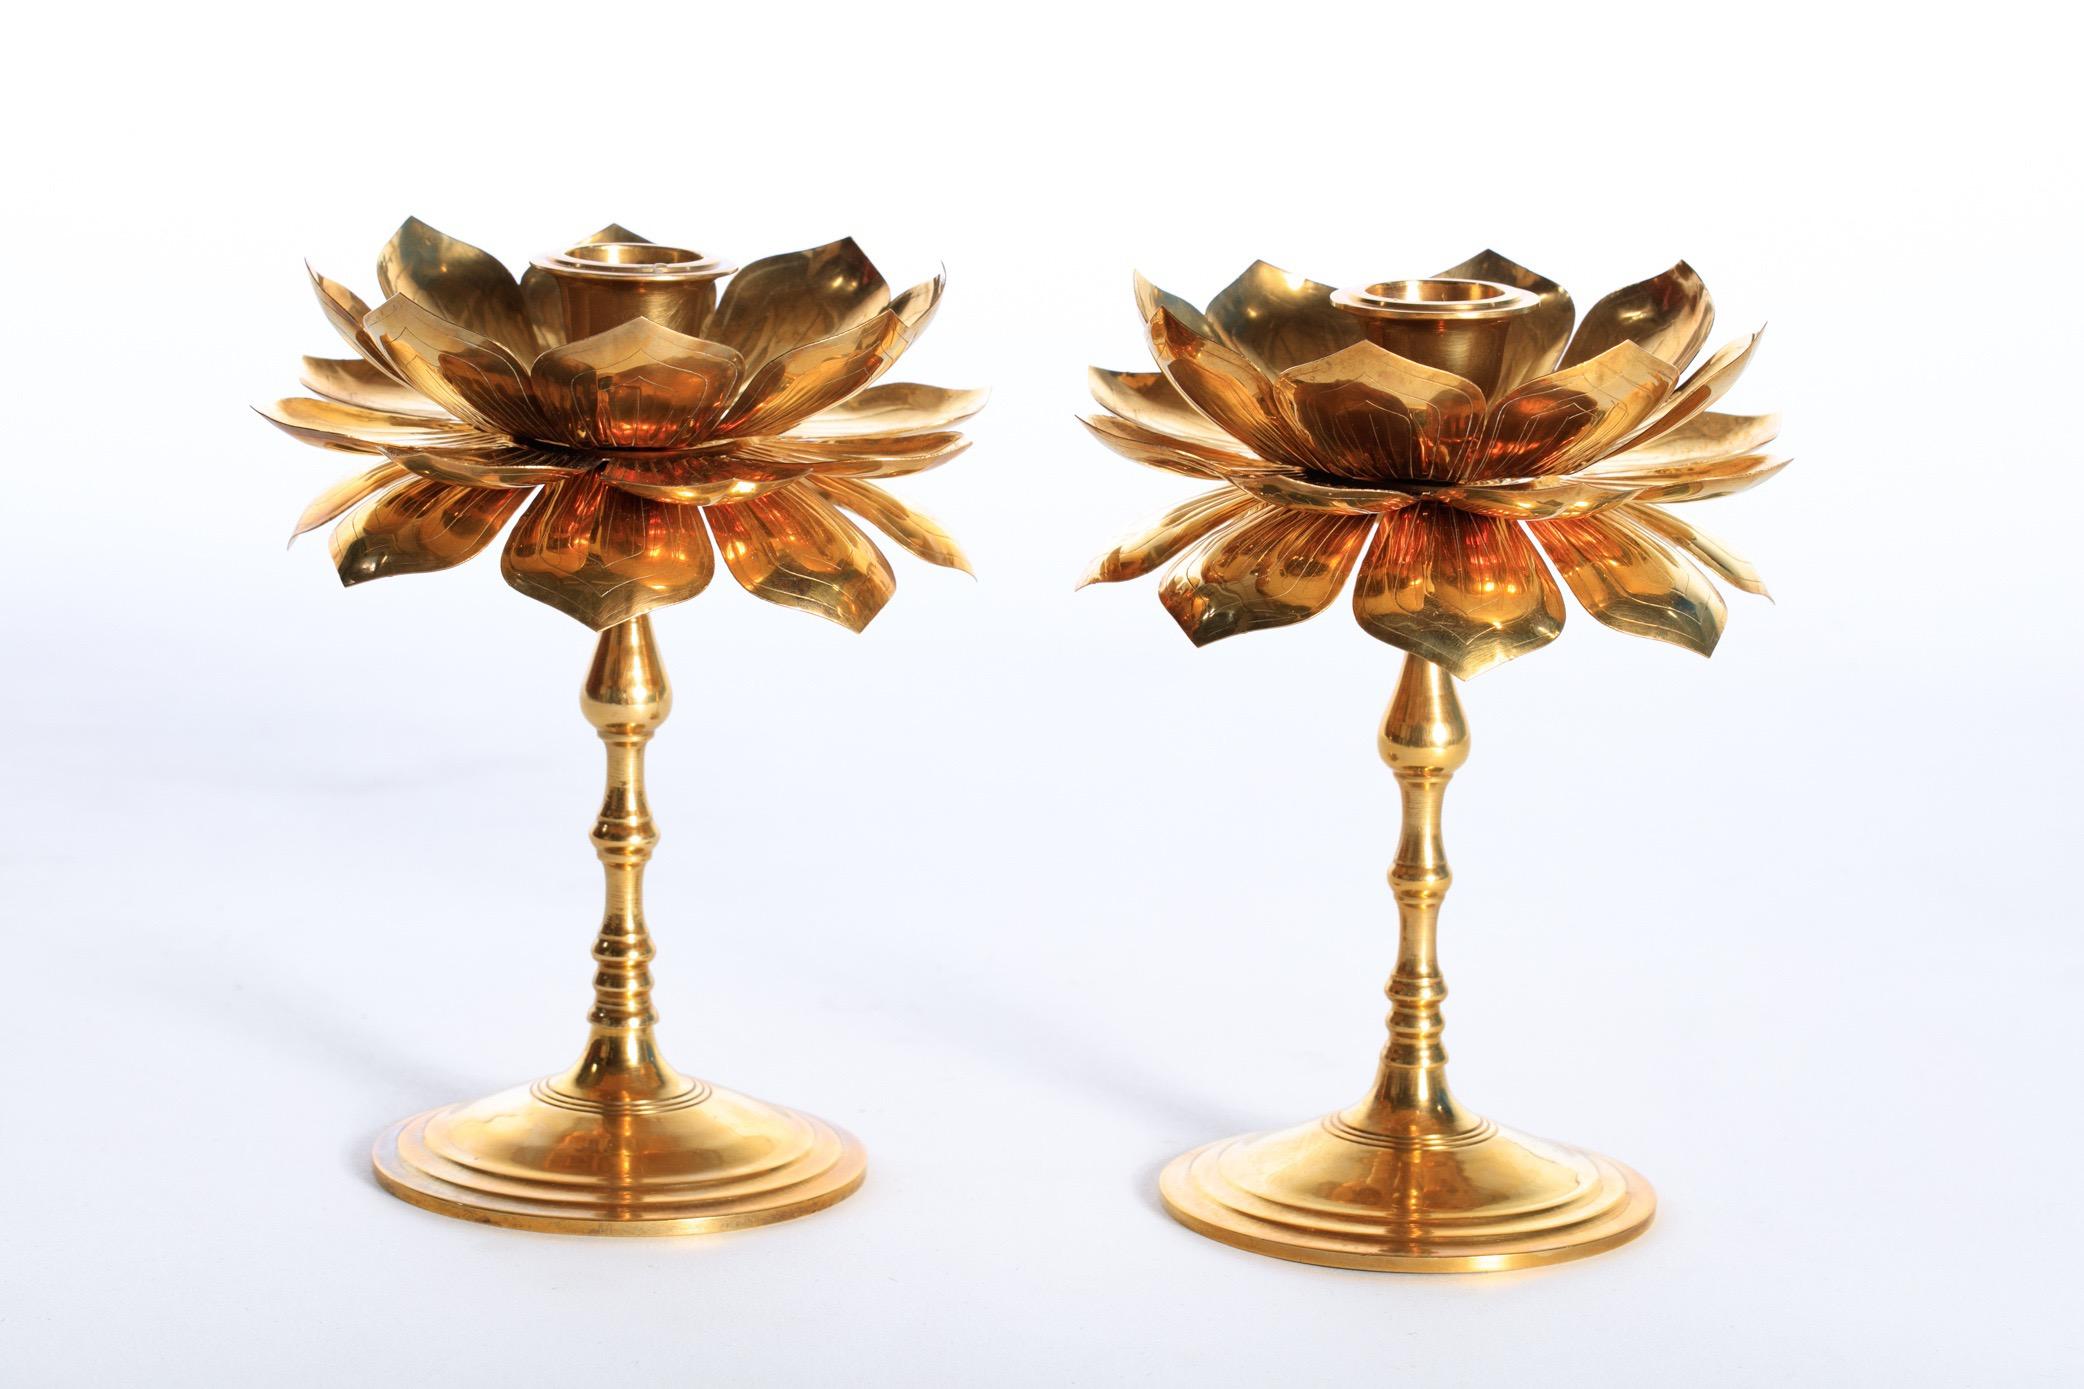 Rare and beautiful pair of lotus flower candlesticks by Feldman in the style of Parzinger. The beautifully polished brass finish reflects the gentle glow of the candle light making these delicate, elegant and most noticeable. An additional feature -